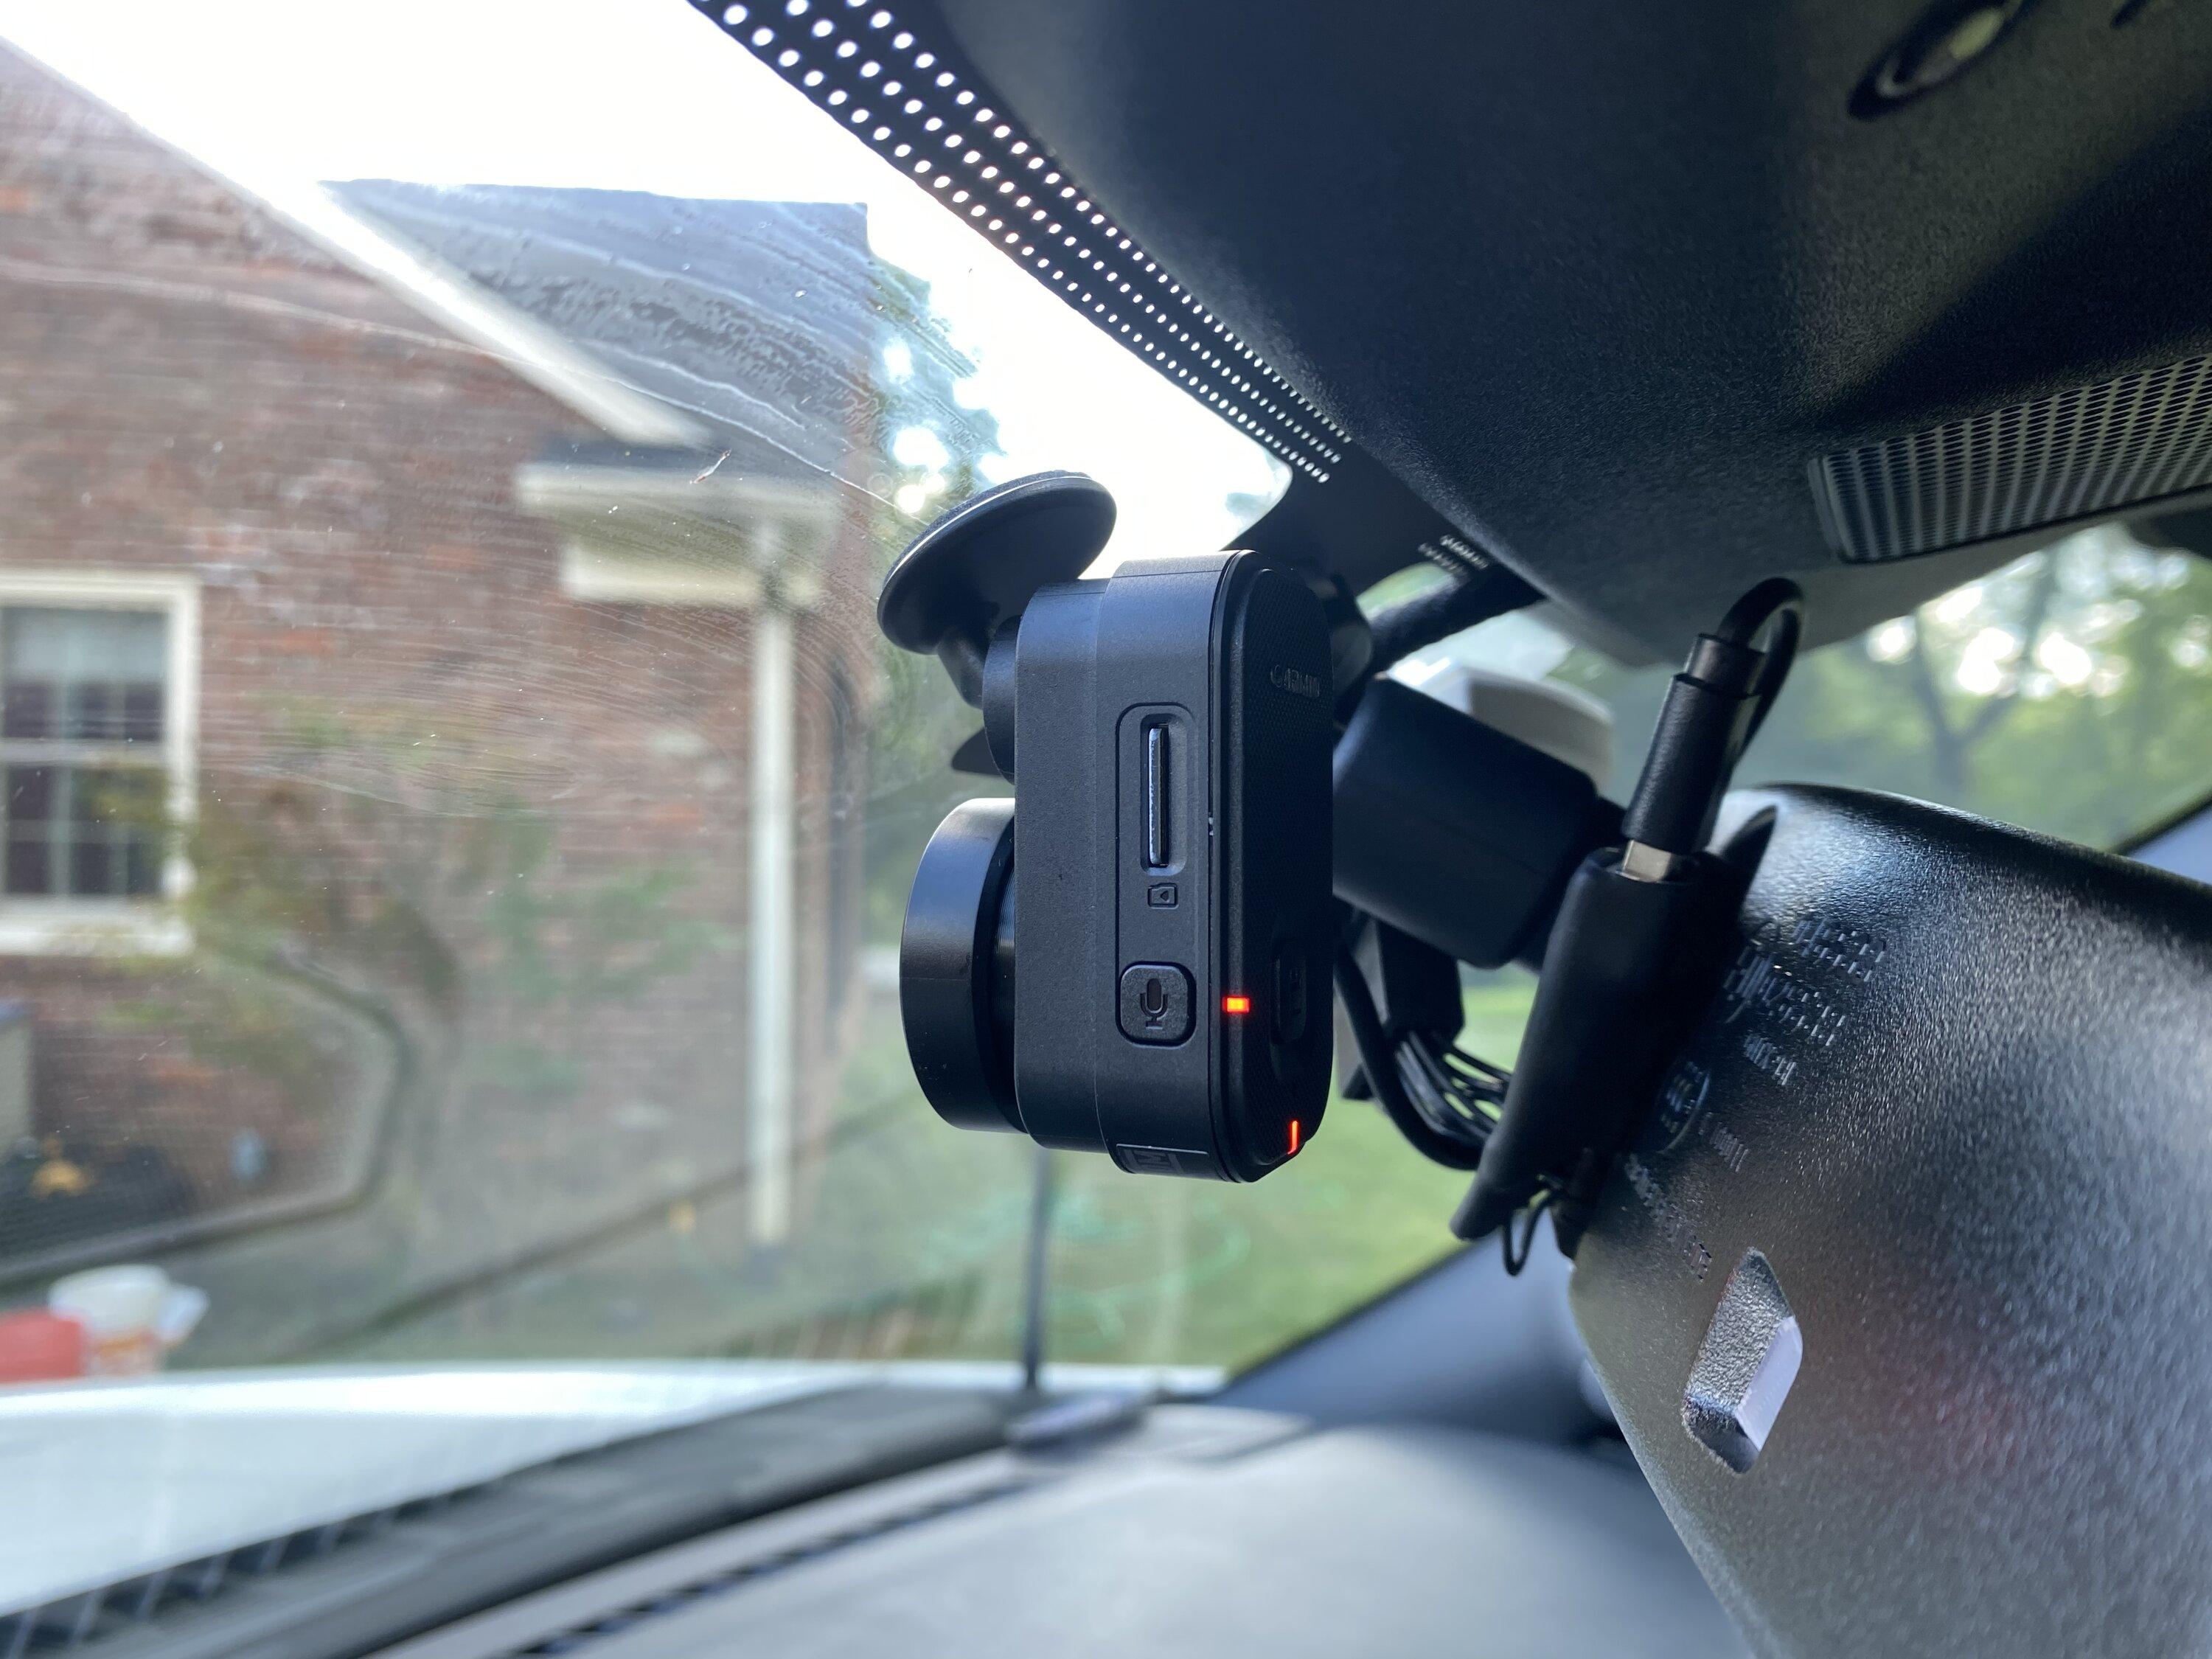 Garmin DASH CAM Mini: Review and Install in a Ford Transit